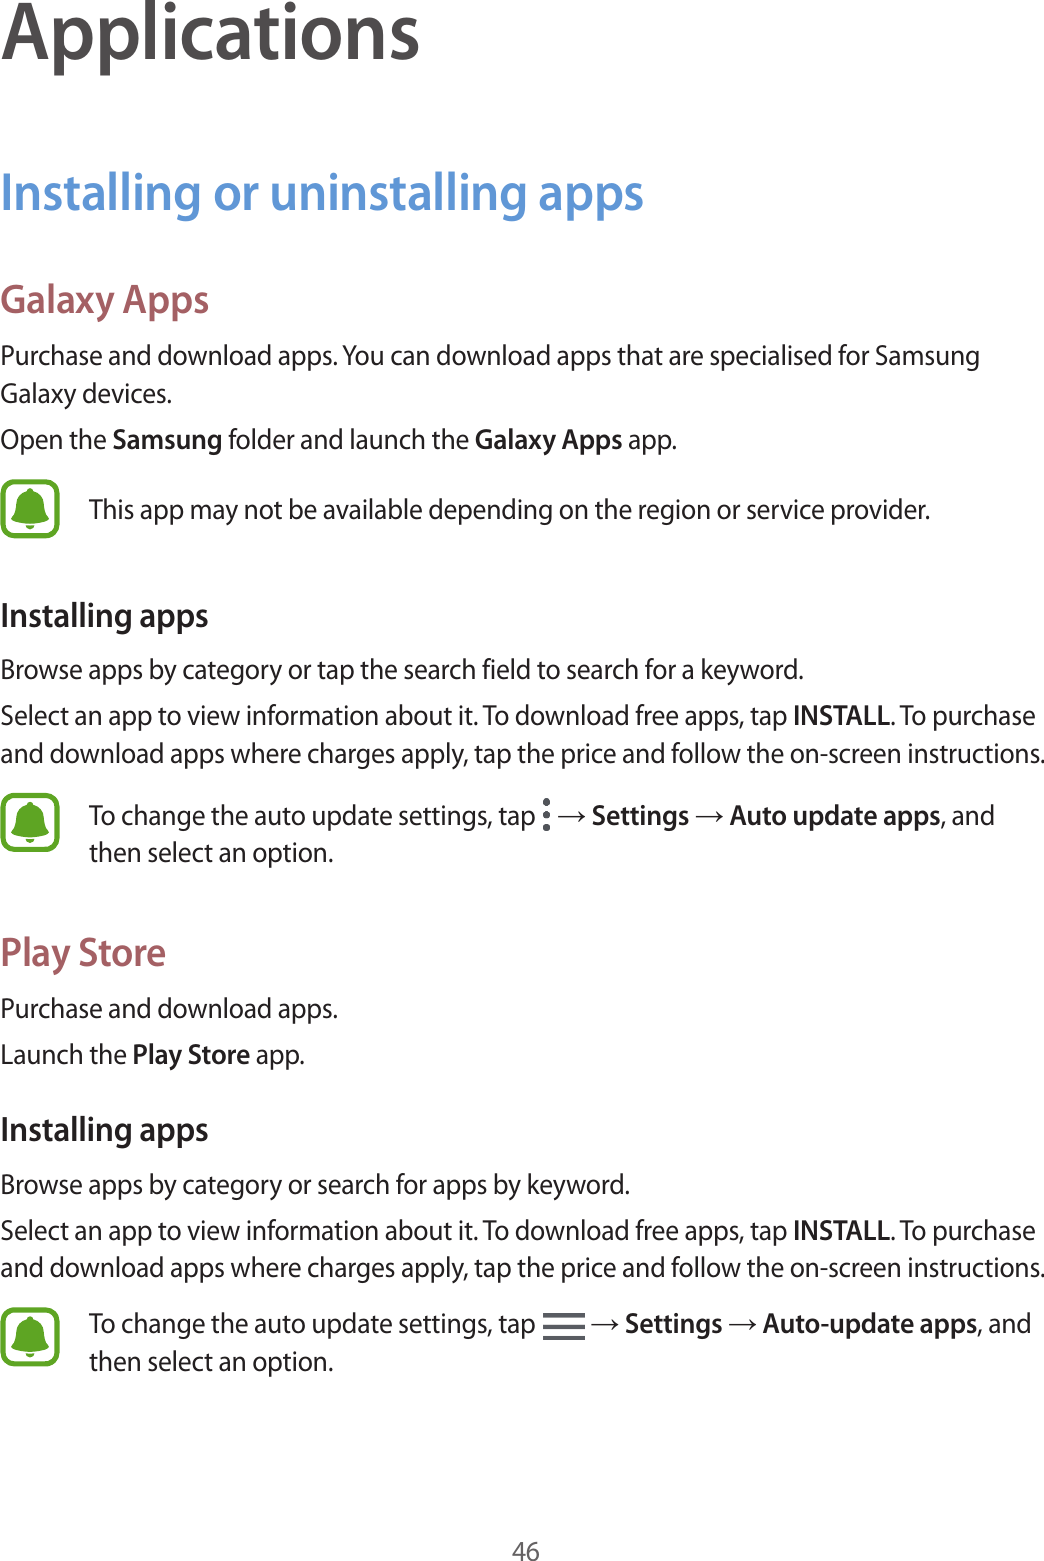 46ApplicationsInstalling or uninstalling appsGalaxy AppsPurchase and download apps. You can download apps that are specialised for Samsung Galaxy devices.Open the Samsung folder and launch the Galaxy Apps app.This app may not be available depending on the region or service provider.Installing appsBrowse apps by category or tap the search field to search for a keyword.Select an app to view information about it. To download free apps, tap INSTALL. To purchase and download apps where charges apply, tap the price and follow the on-screen instructions.To change the auto update settings, tap   → Settings → Auto update apps, and then select an option.Play StorePurchase and download apps.Launch the Play Store app.Installing appsBrowse apps by category or search for apps by keyword.Select an app to view information about it. To download free apps, tap INSTALL. To purchase and download apps where charges apply, tap the price and follow the on-screen instructions.To change the auto update settings, tap   → Settings → Auto-update apps, and then select an option.